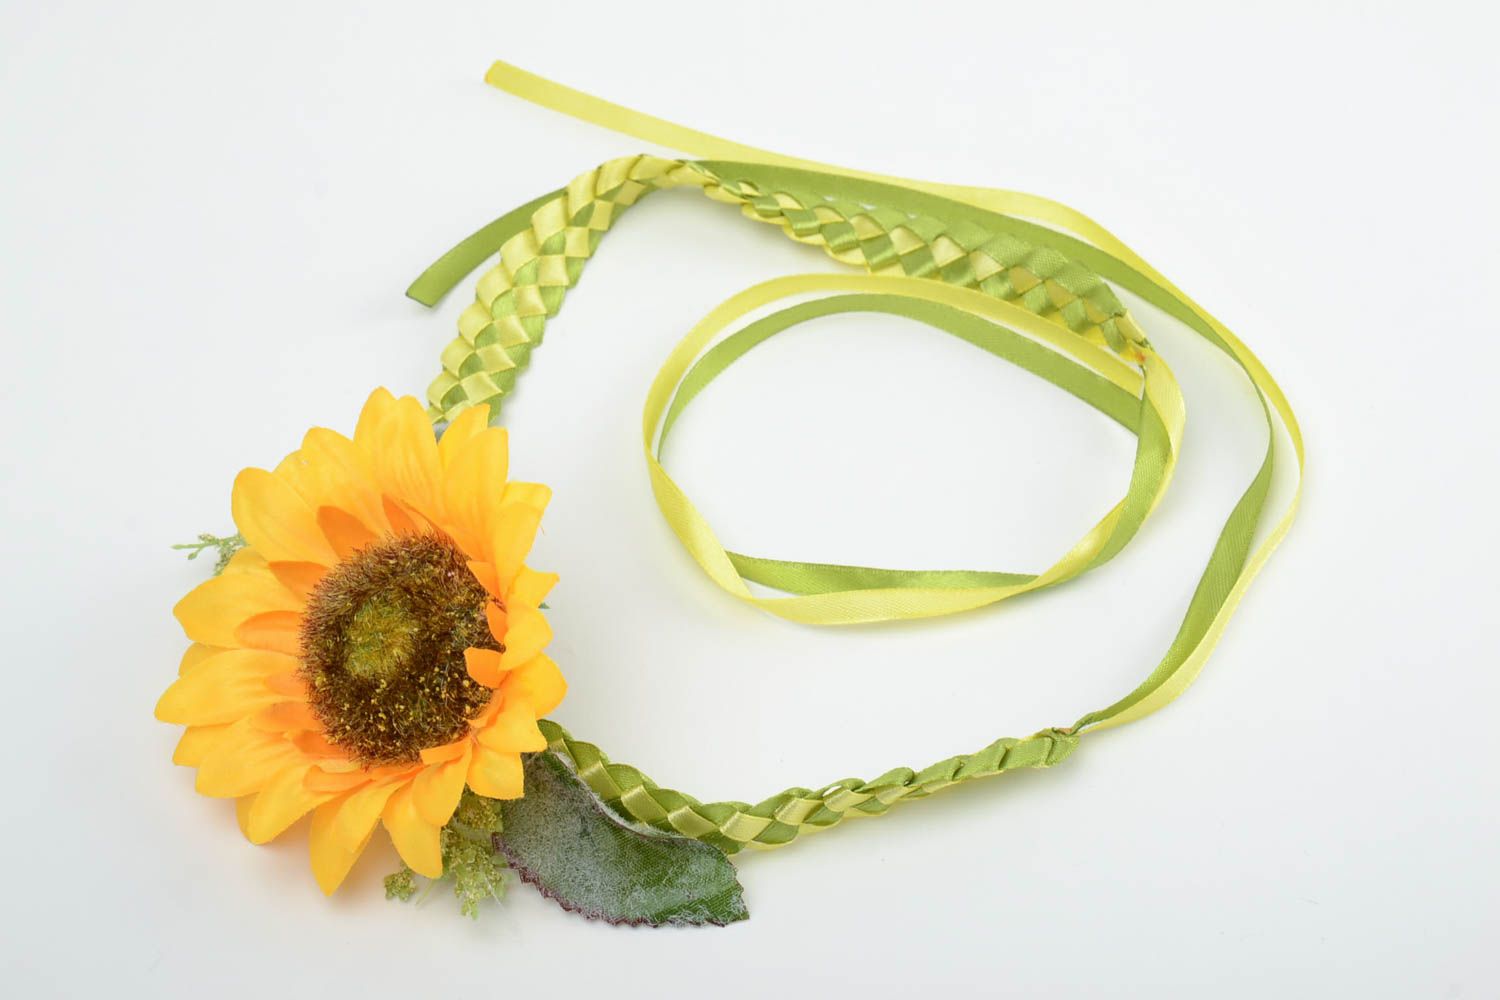 Handmade decorative summer headband woven of green ribbons with large sunflower photo 2